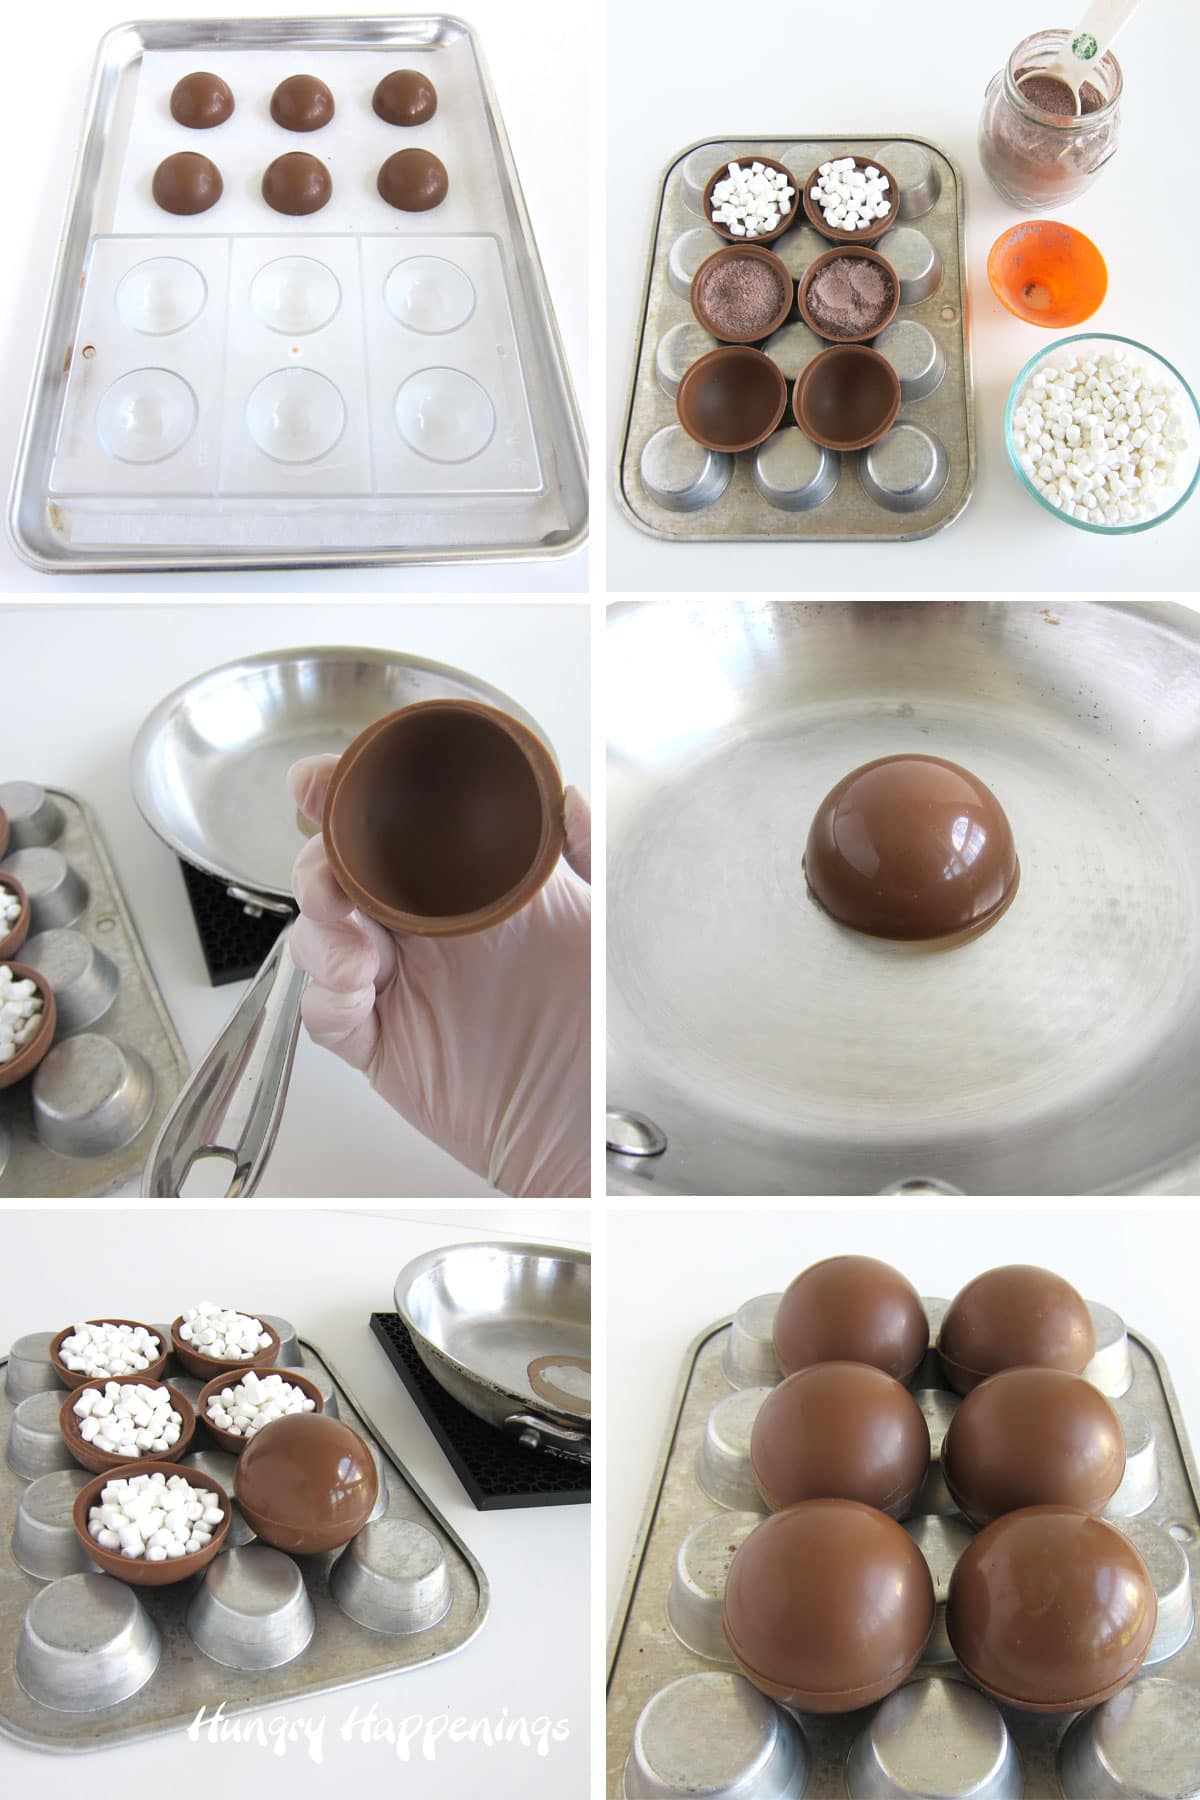 Fill milk chocolate shells with hot cocoa mix and marshmallows, then melt the top edge and seal two chocolate shells together to form a ball.